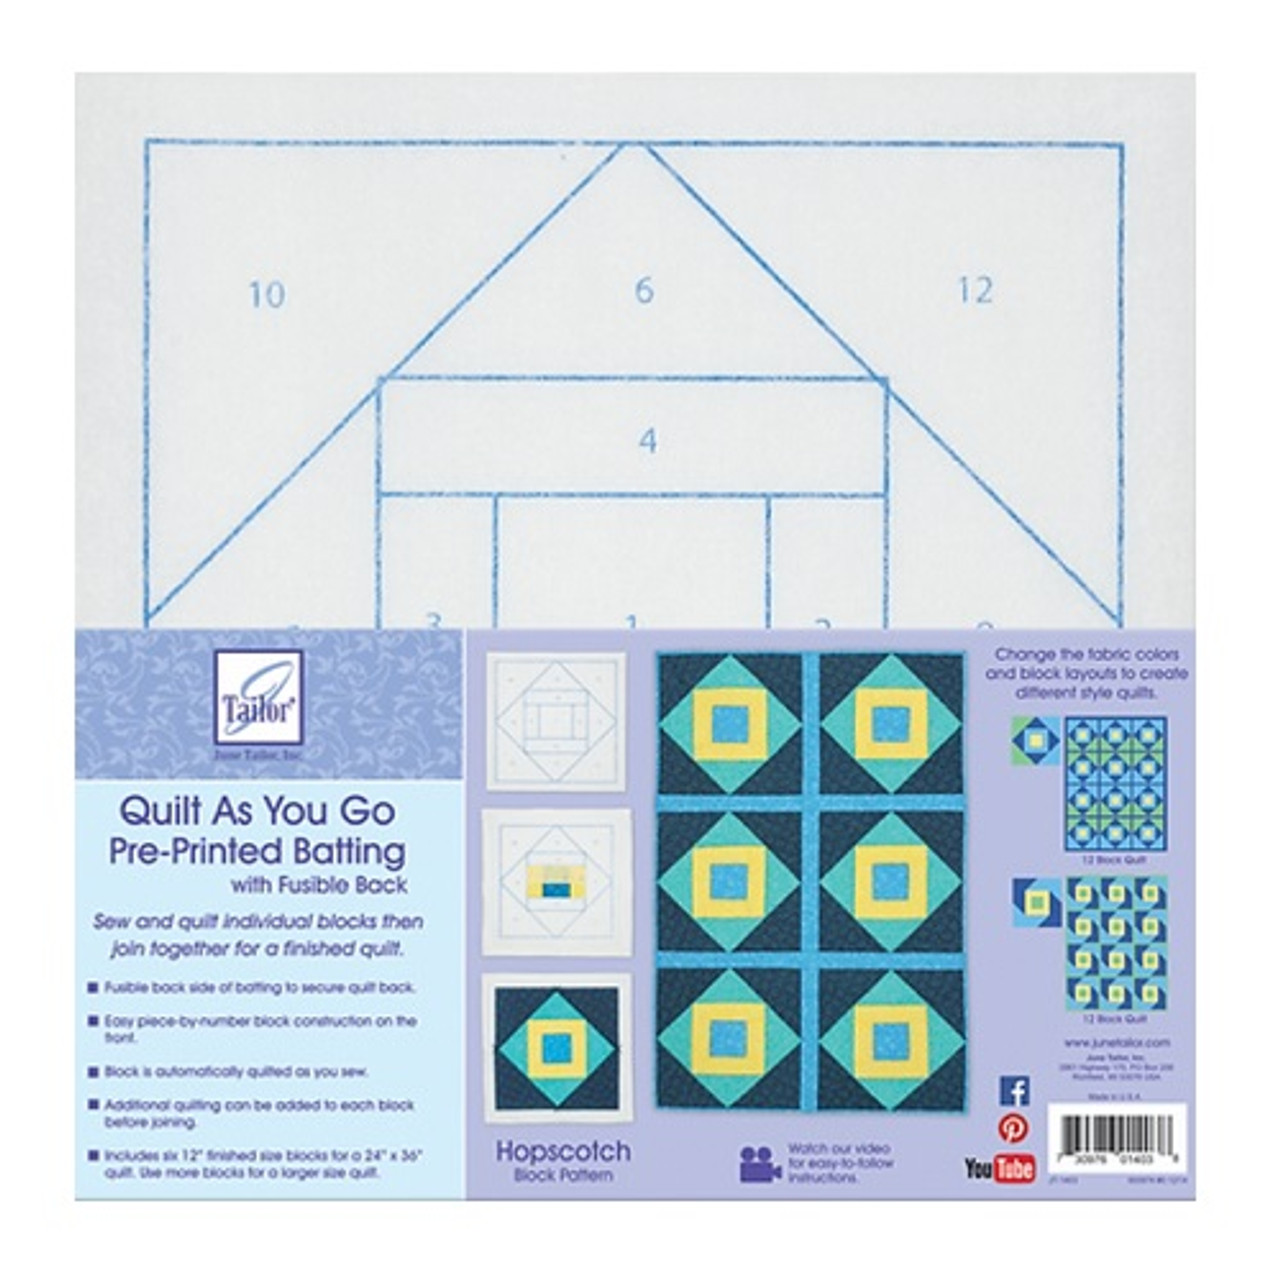 Hopscotch - Quilt As You Go - June Tailor - Big Dog Sewing